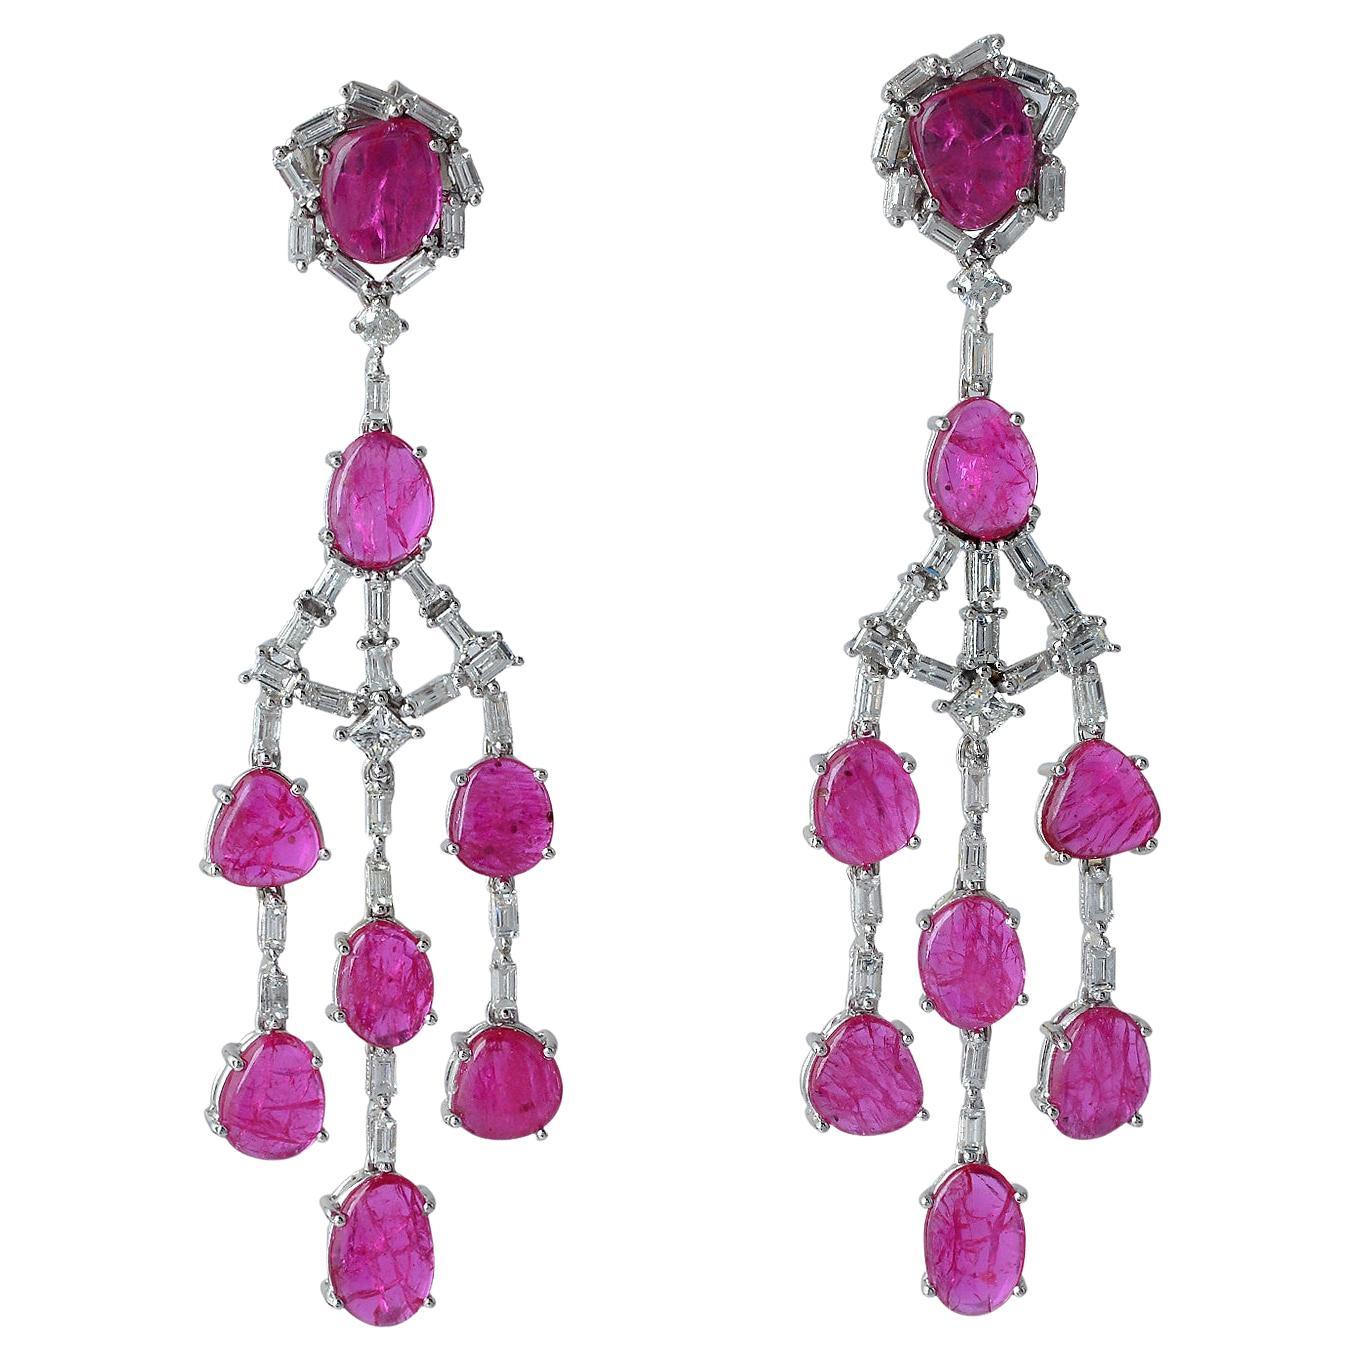 Multi Shaped Ruby Chandelier Earrings With Diamonds Made In 18k white Gold For Sale